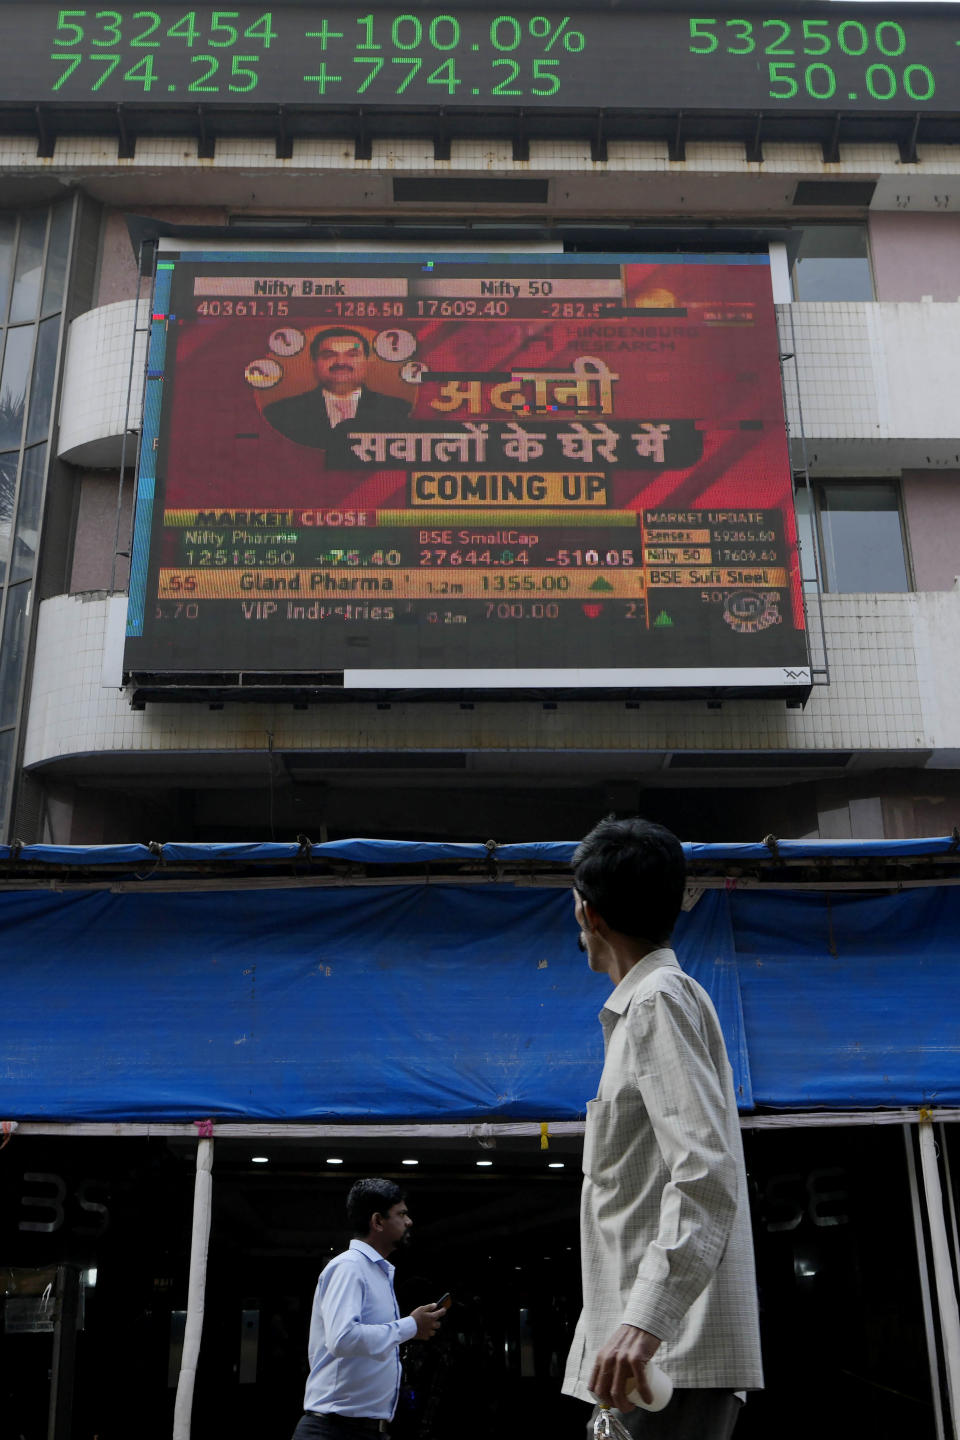 People walk past an electronic display featuring news about Adani Group outside the Bombay Stock Exchange building in Mumbai, India, Friday, Jan. 27, 2023. India’s Adani Group launched a share offering for retail investors Friday as it mulled taking legal action against U.S.-based short-selling firm Hindenburg Research over a report that led investors to dump its shares, with some stocks in the group falling up to 20% on Friday. (AP Photo/Rajanish Kakade)